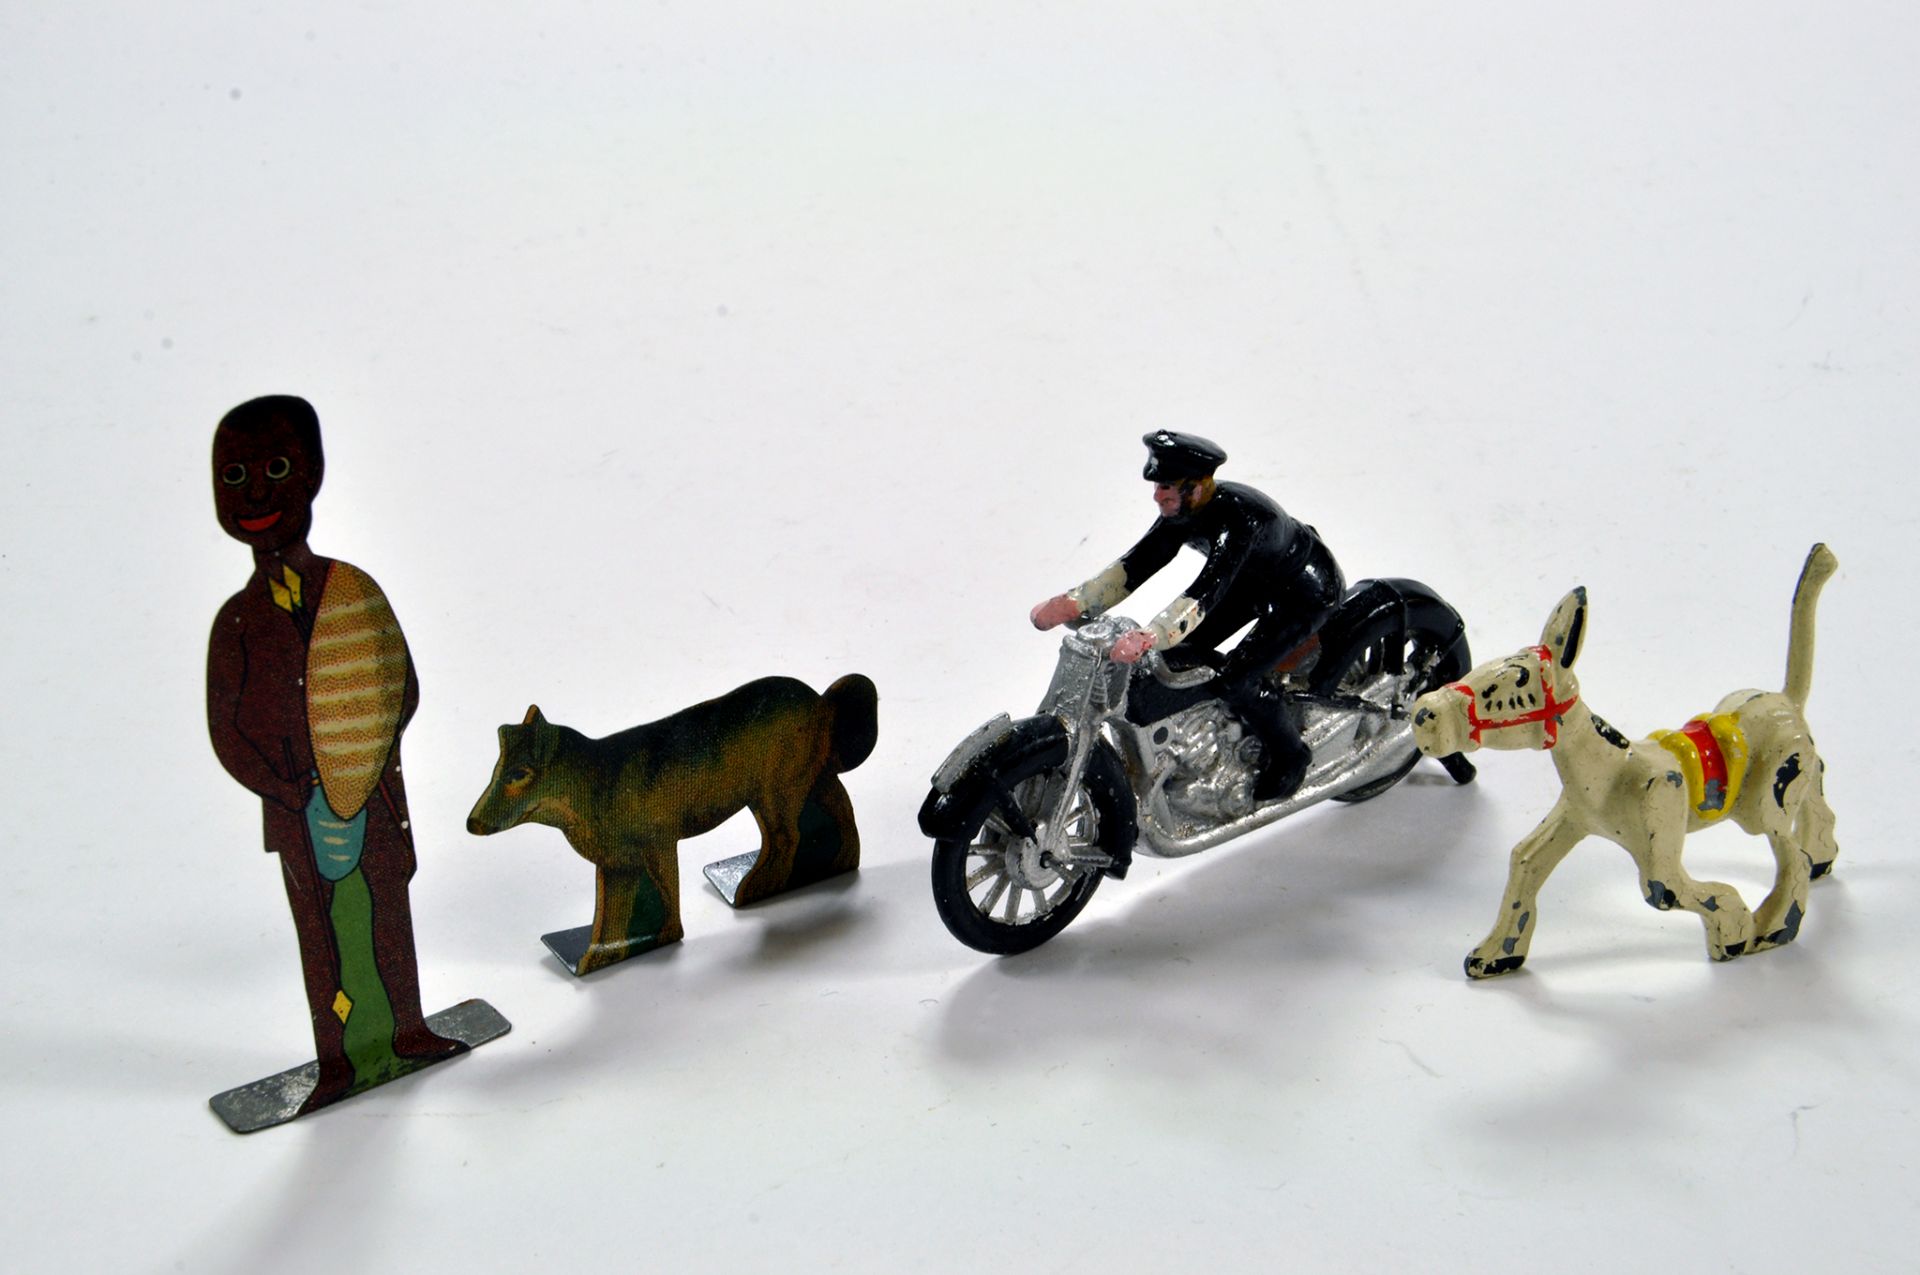 An interesting group of metal figures, Police Motorbike and flats comprising rare issues. Sacul?